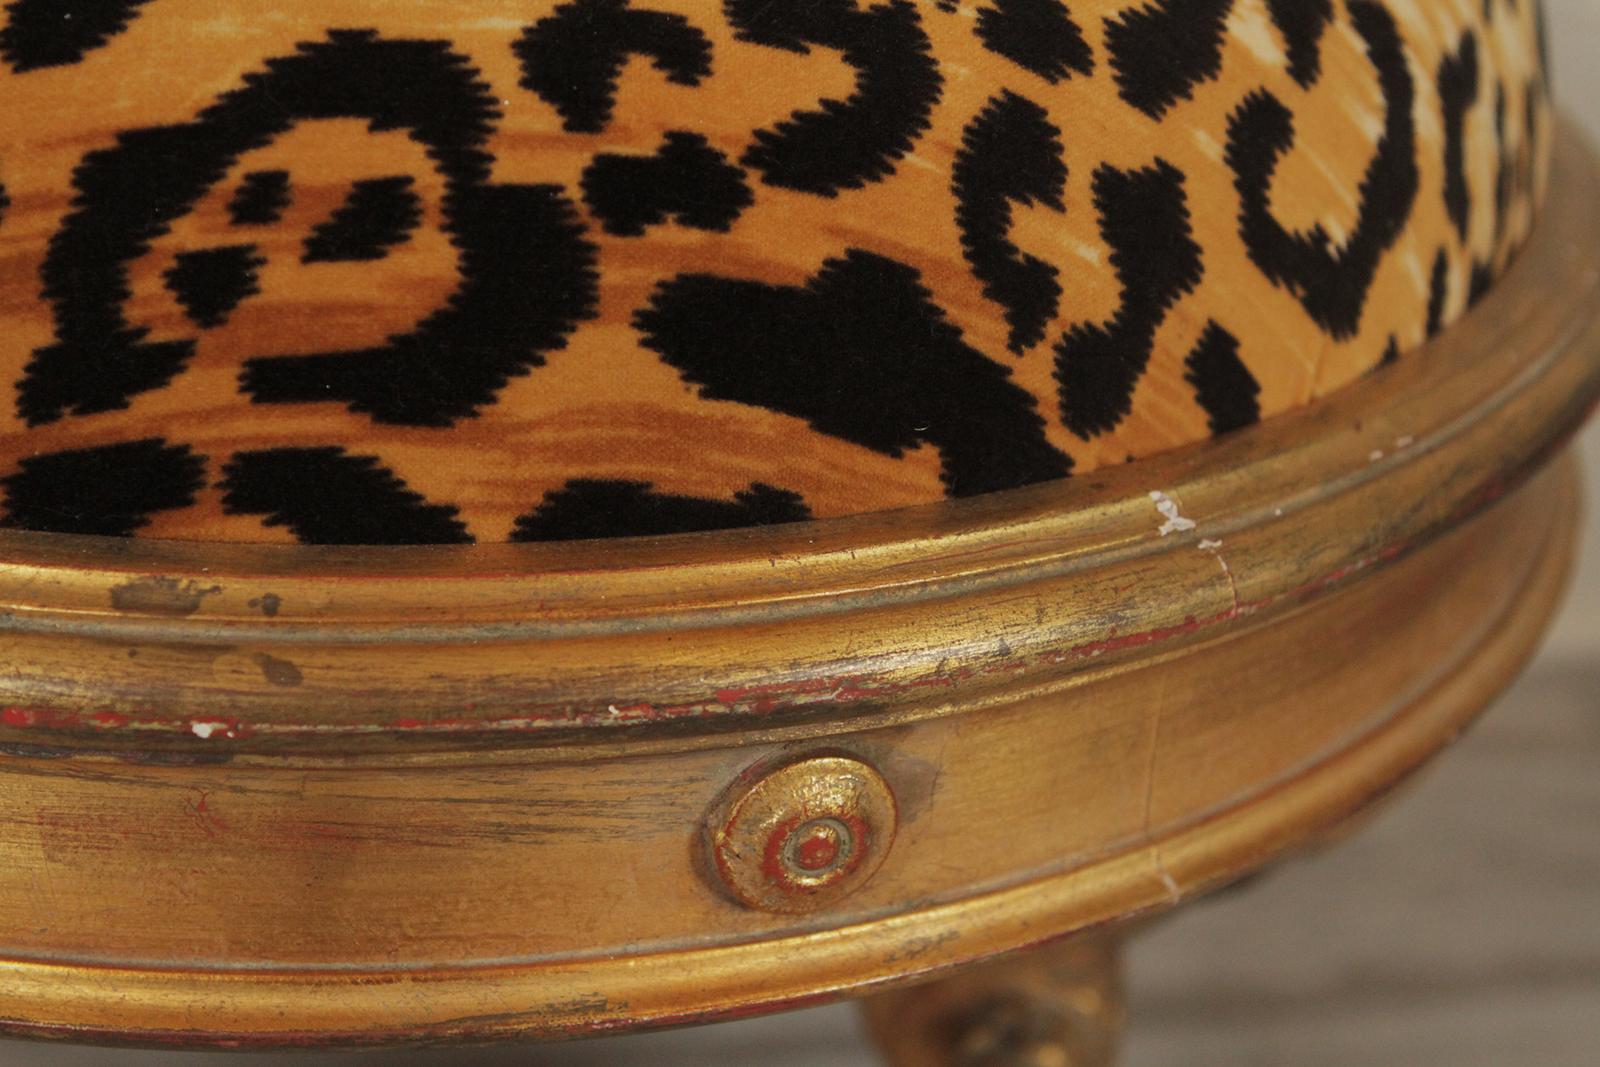 Charles X style giltwood leopard upholstered stool 20th century.
Dimensions:19” height x 21